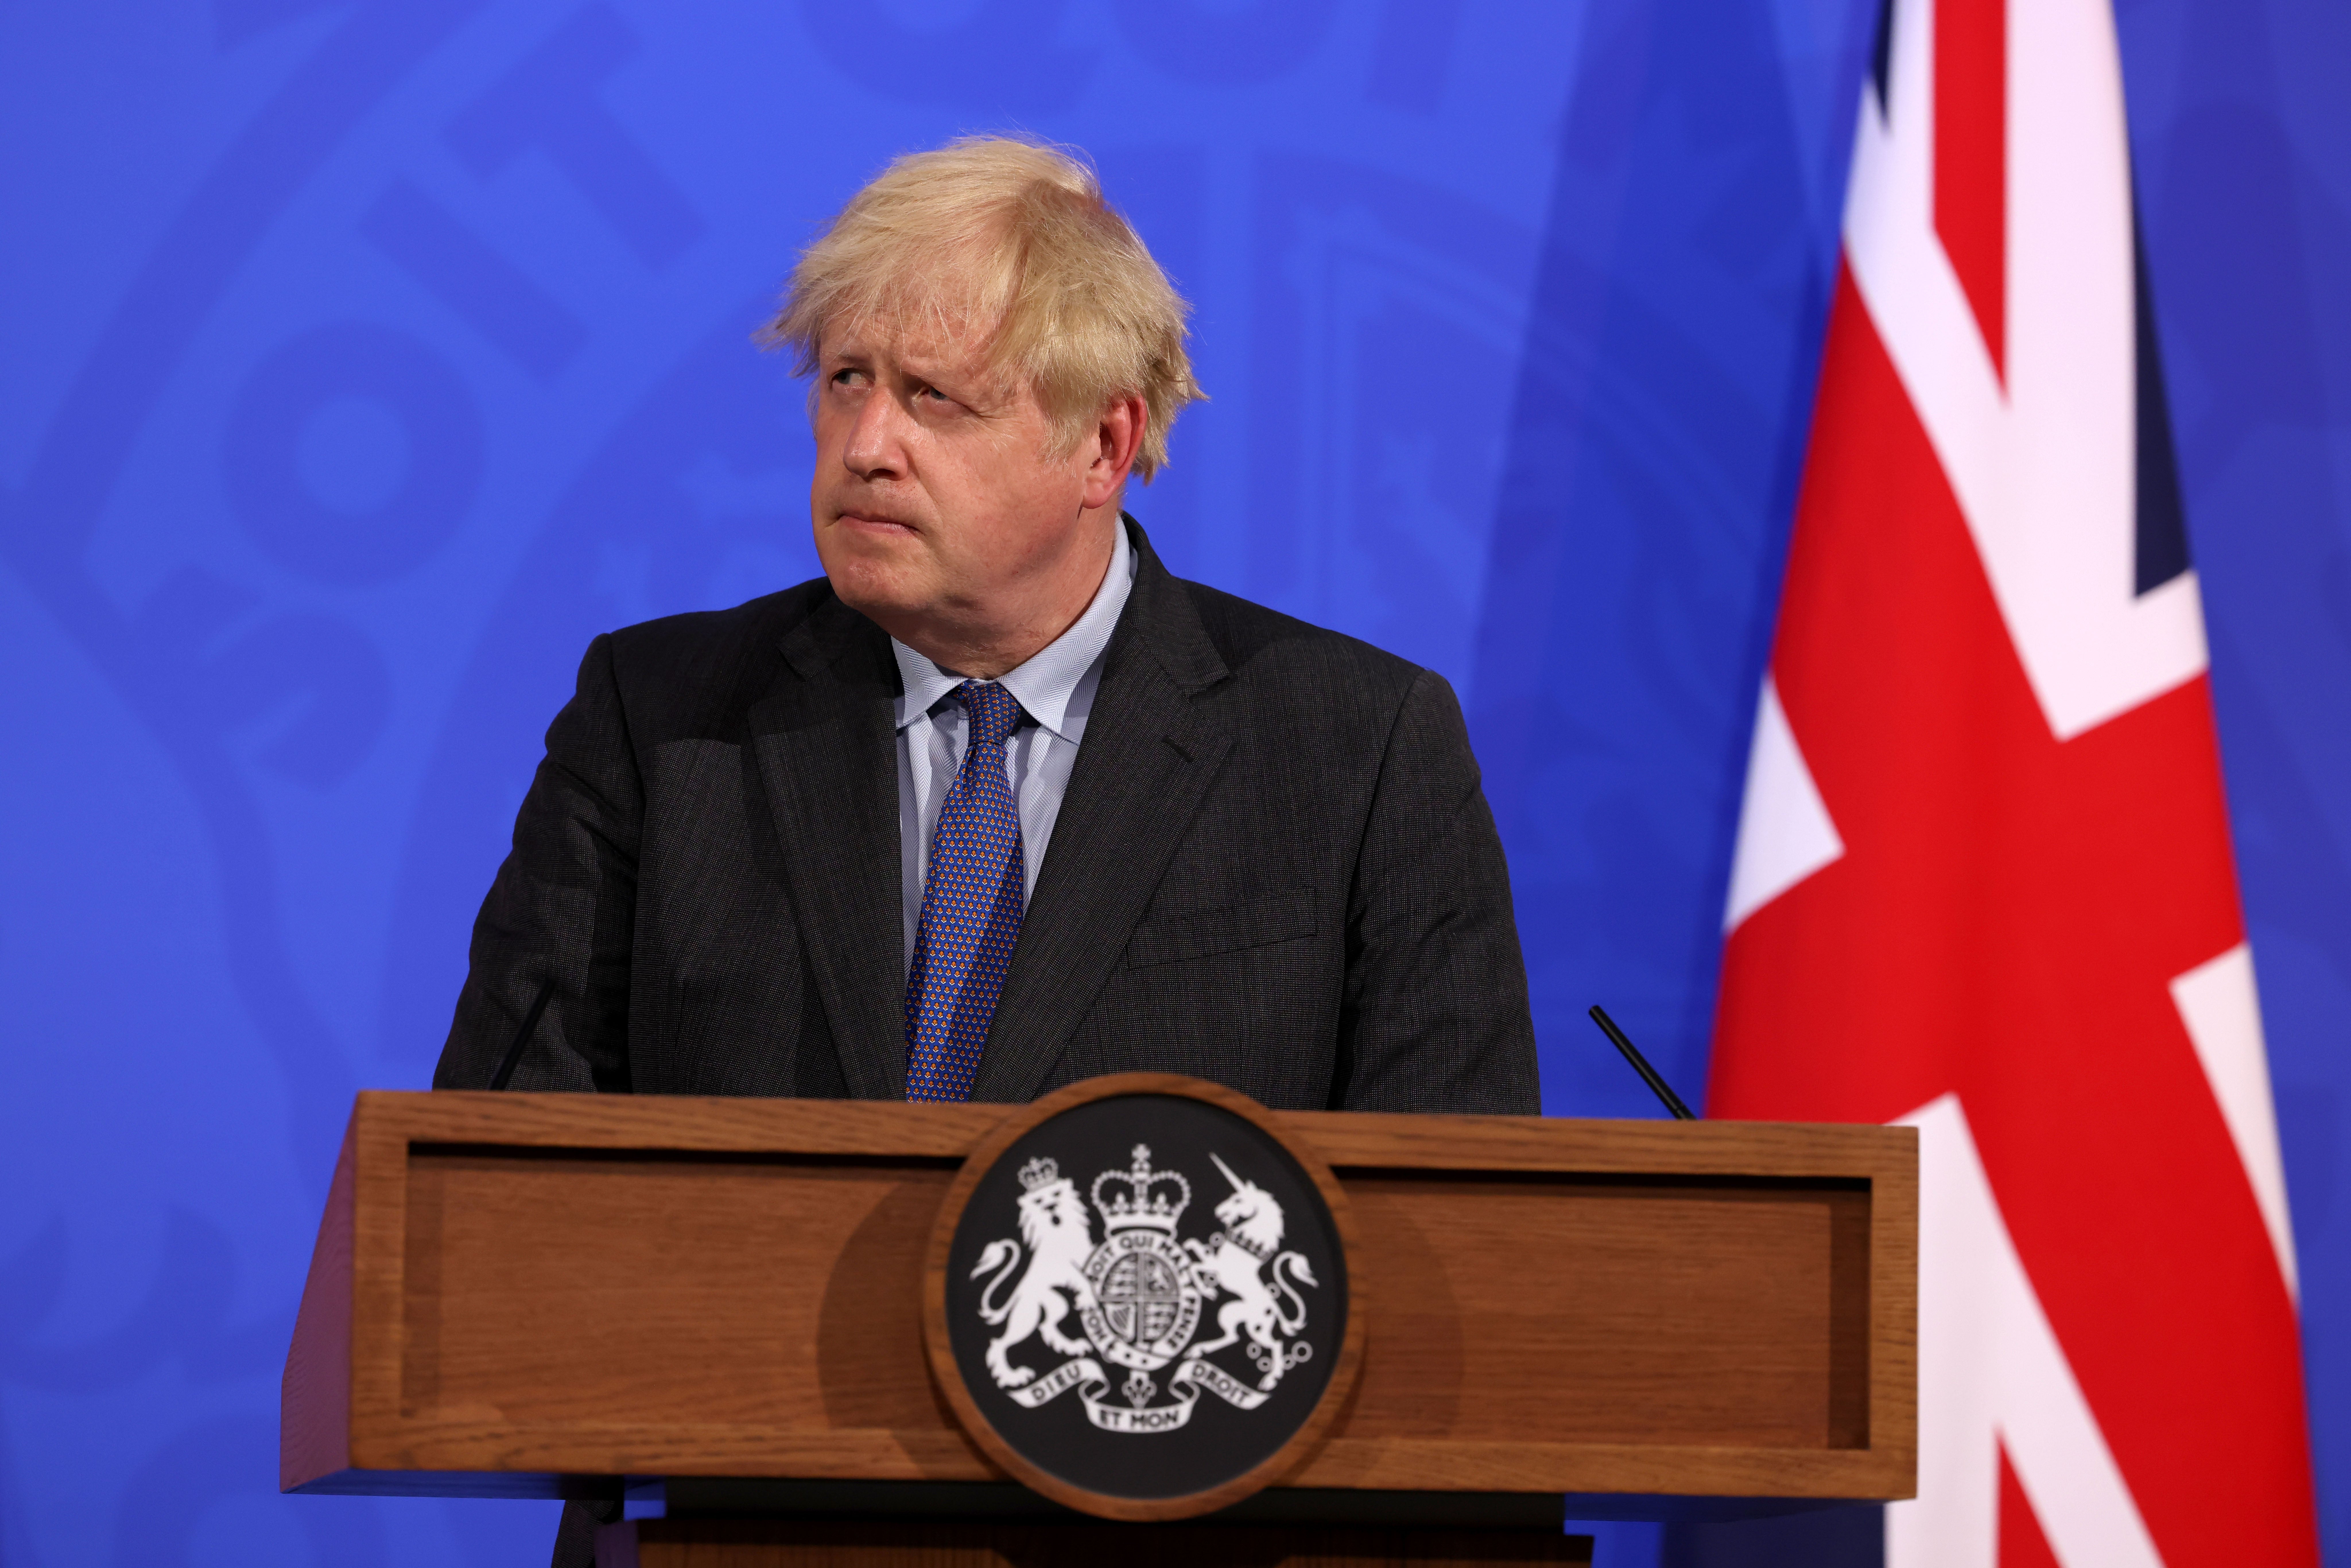 DUP politicians have claimed that the part of Boris Johnson’s Brexit deal known as the Northern Ireland protocol is risking peace in the province